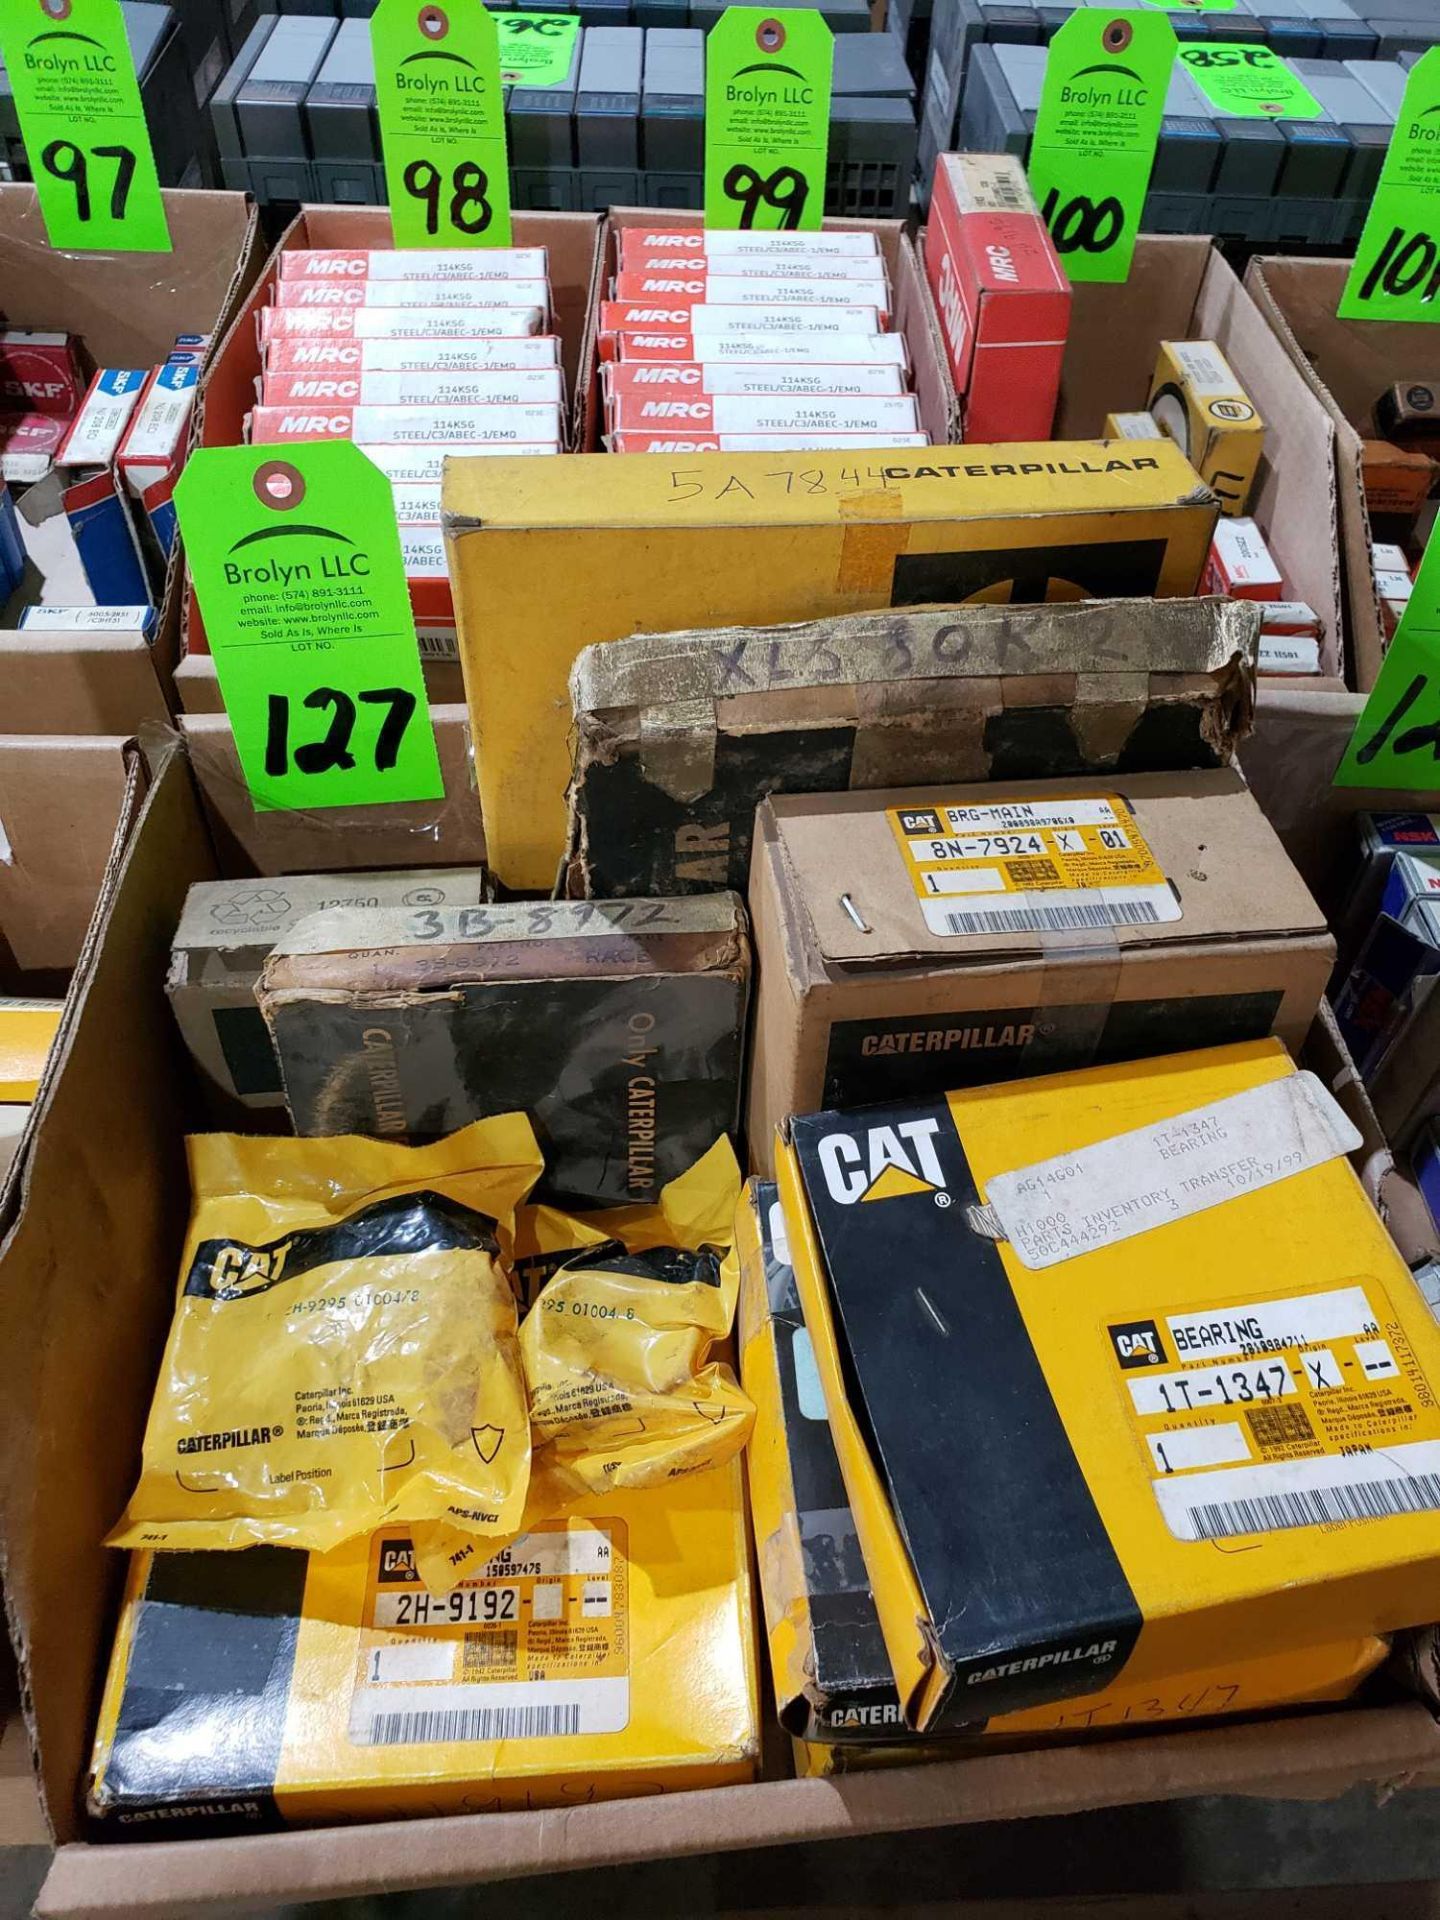 Qty 11- Caterpillar bearings, assorted part numbers. New in boxes as pictured.